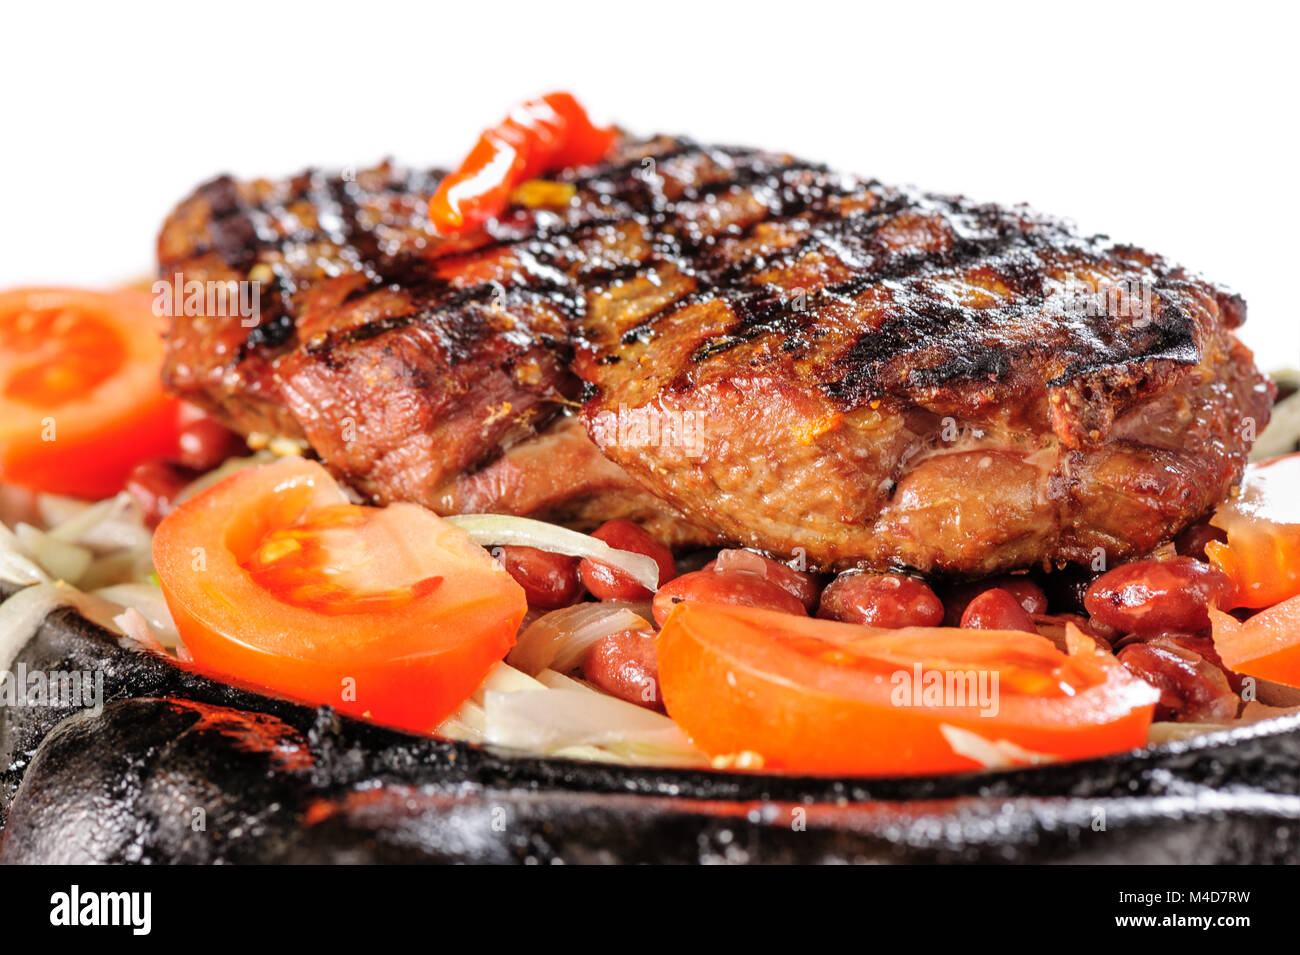 Beef steak with red beans garnish Stock Photo